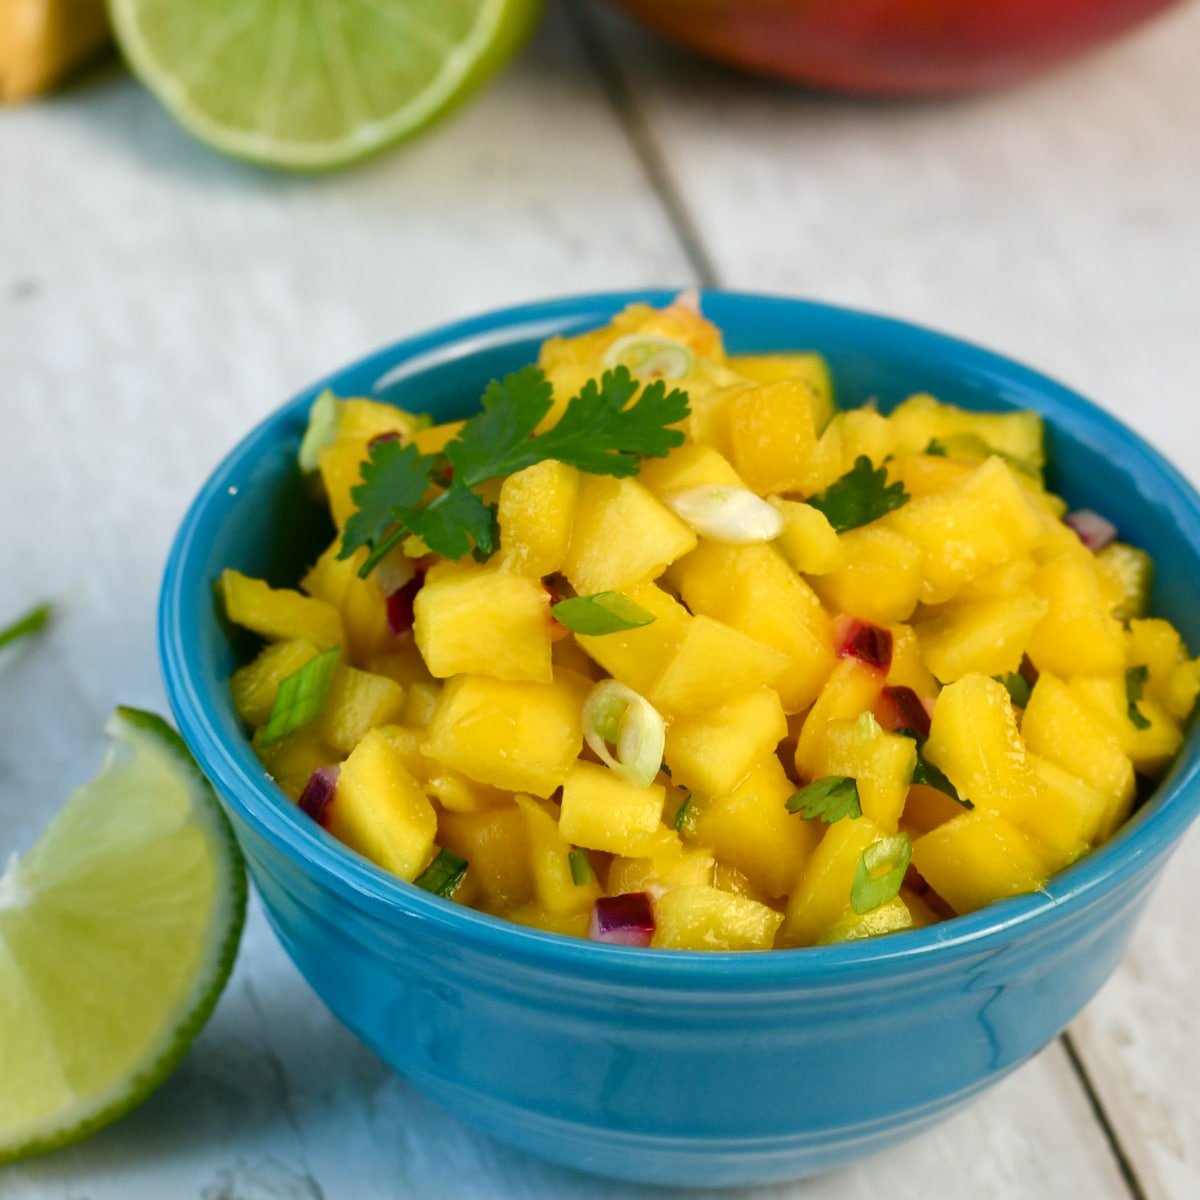 Mango salsa with lime wedge on side of bowl.